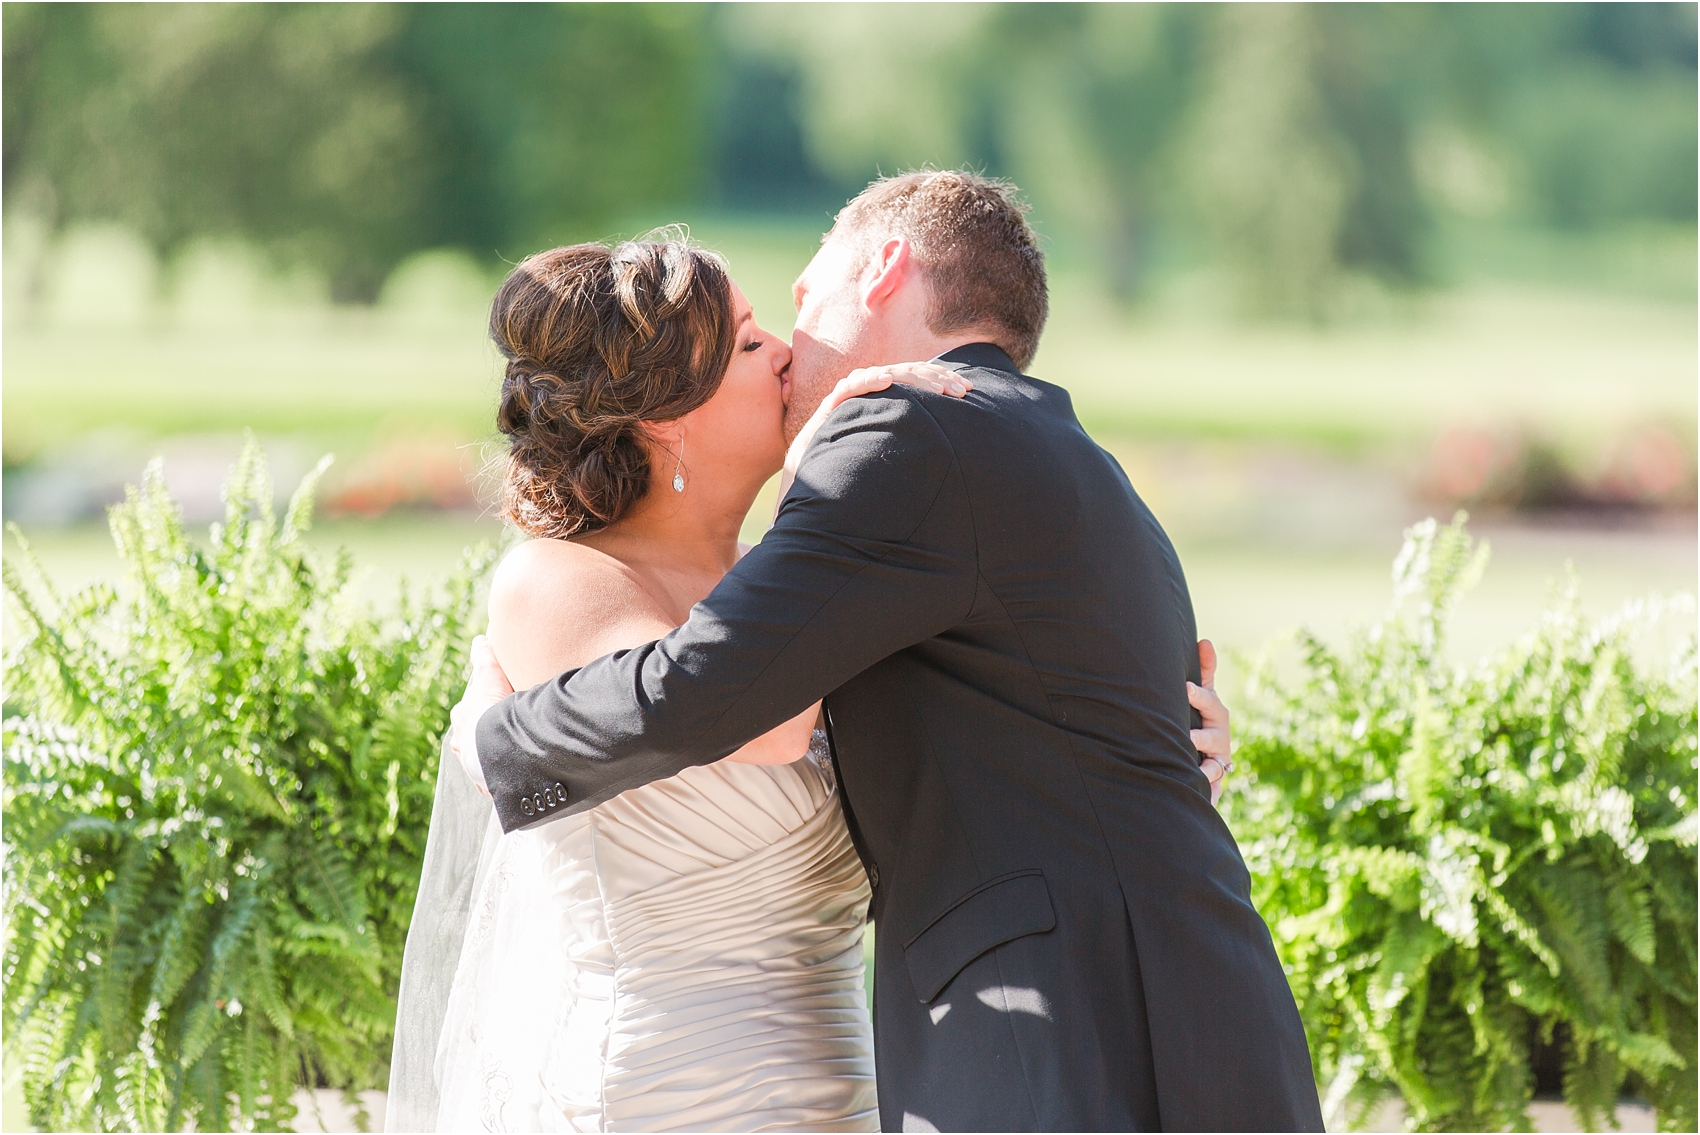 classic-wedding-photos-at-great-oaks-country-club-in-rochester-hills-mi-by-courtney-carolyn-photography_0086.jpg